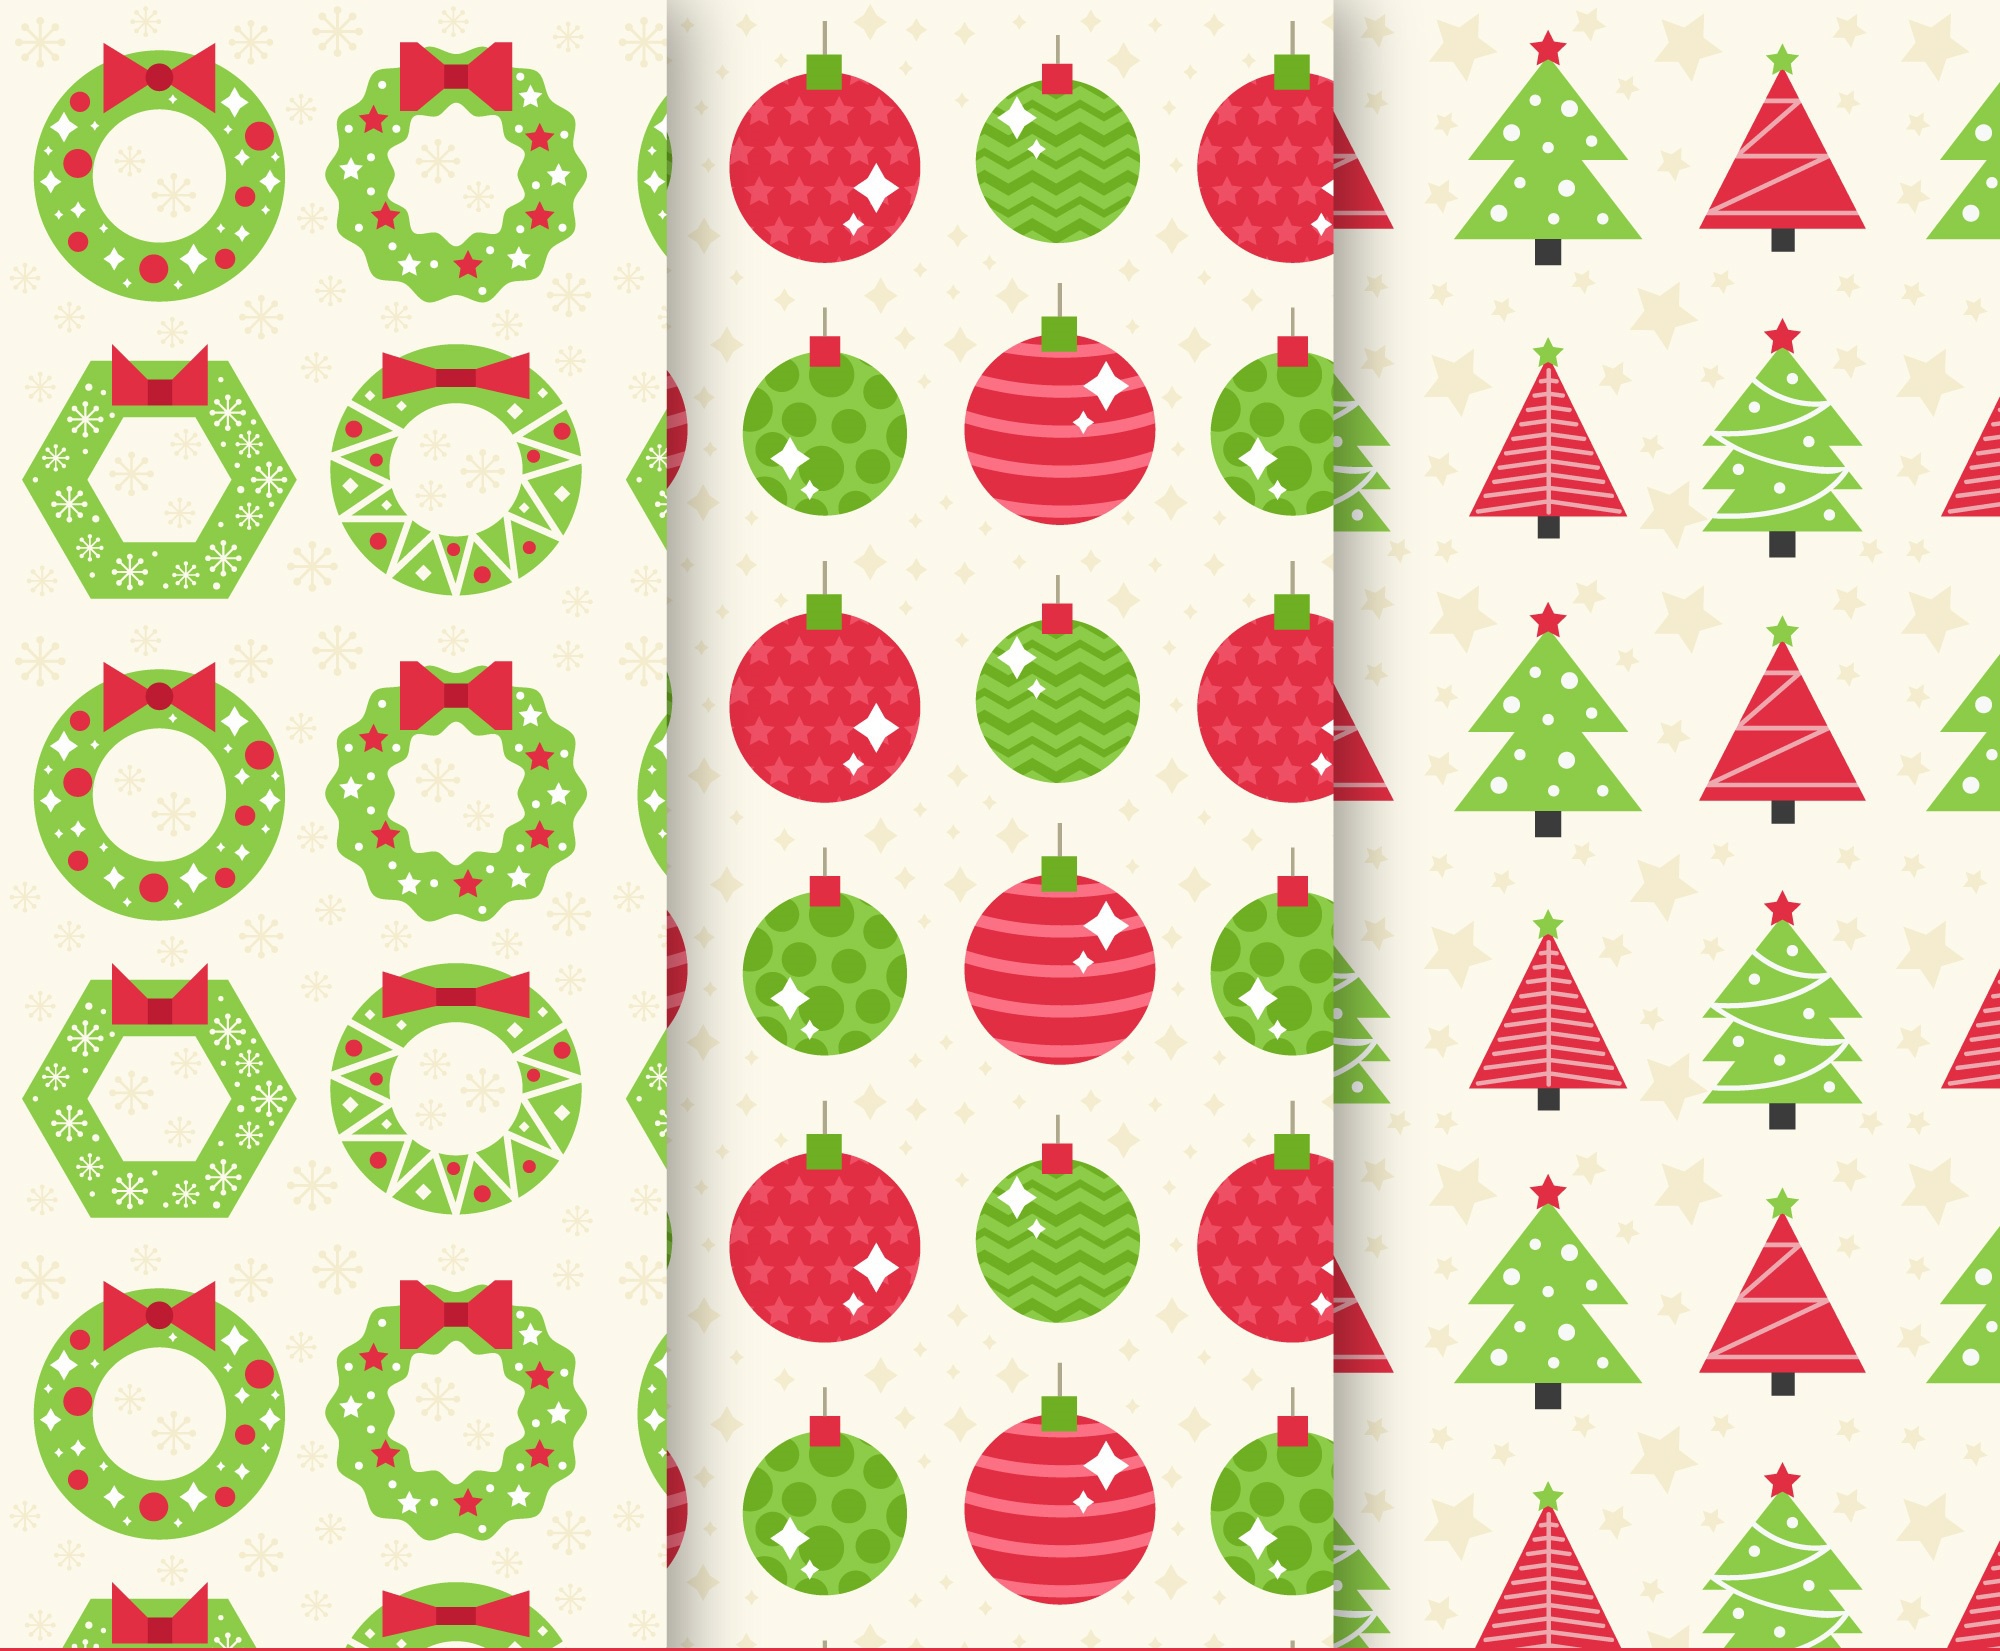 General 2000x1651 pattern texture Christmas